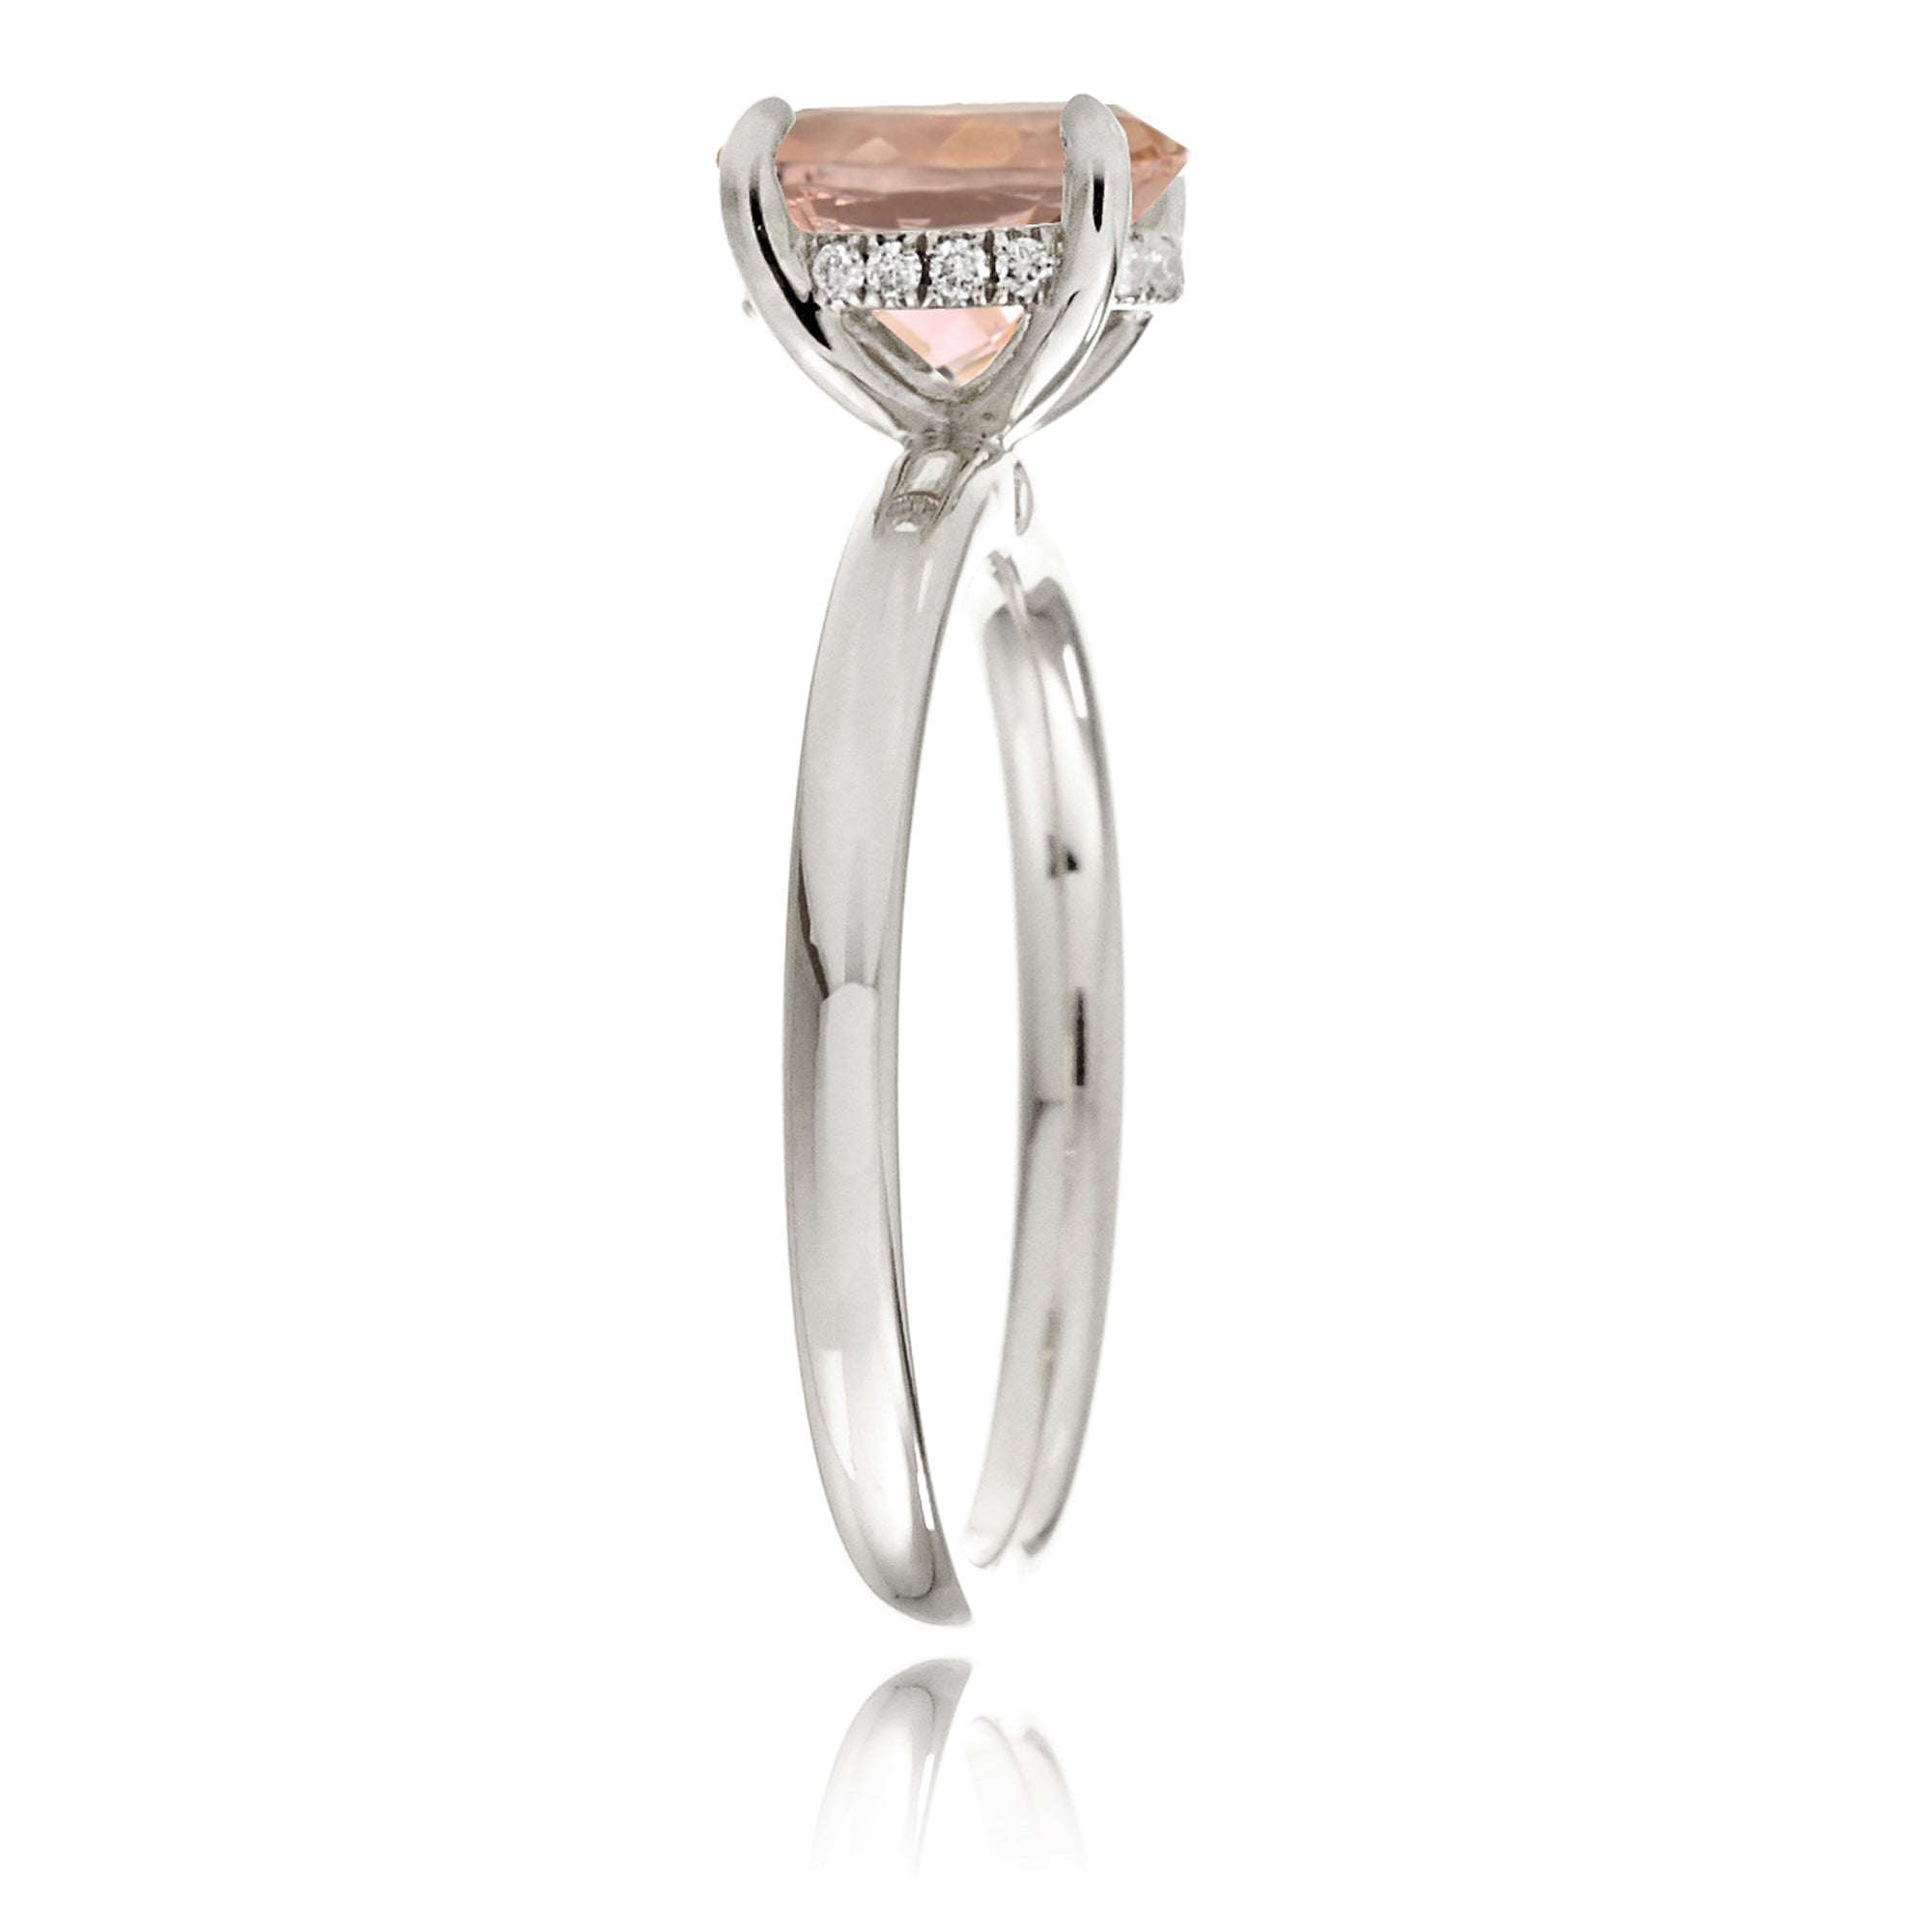 The Lucy Oval Morganite Ring